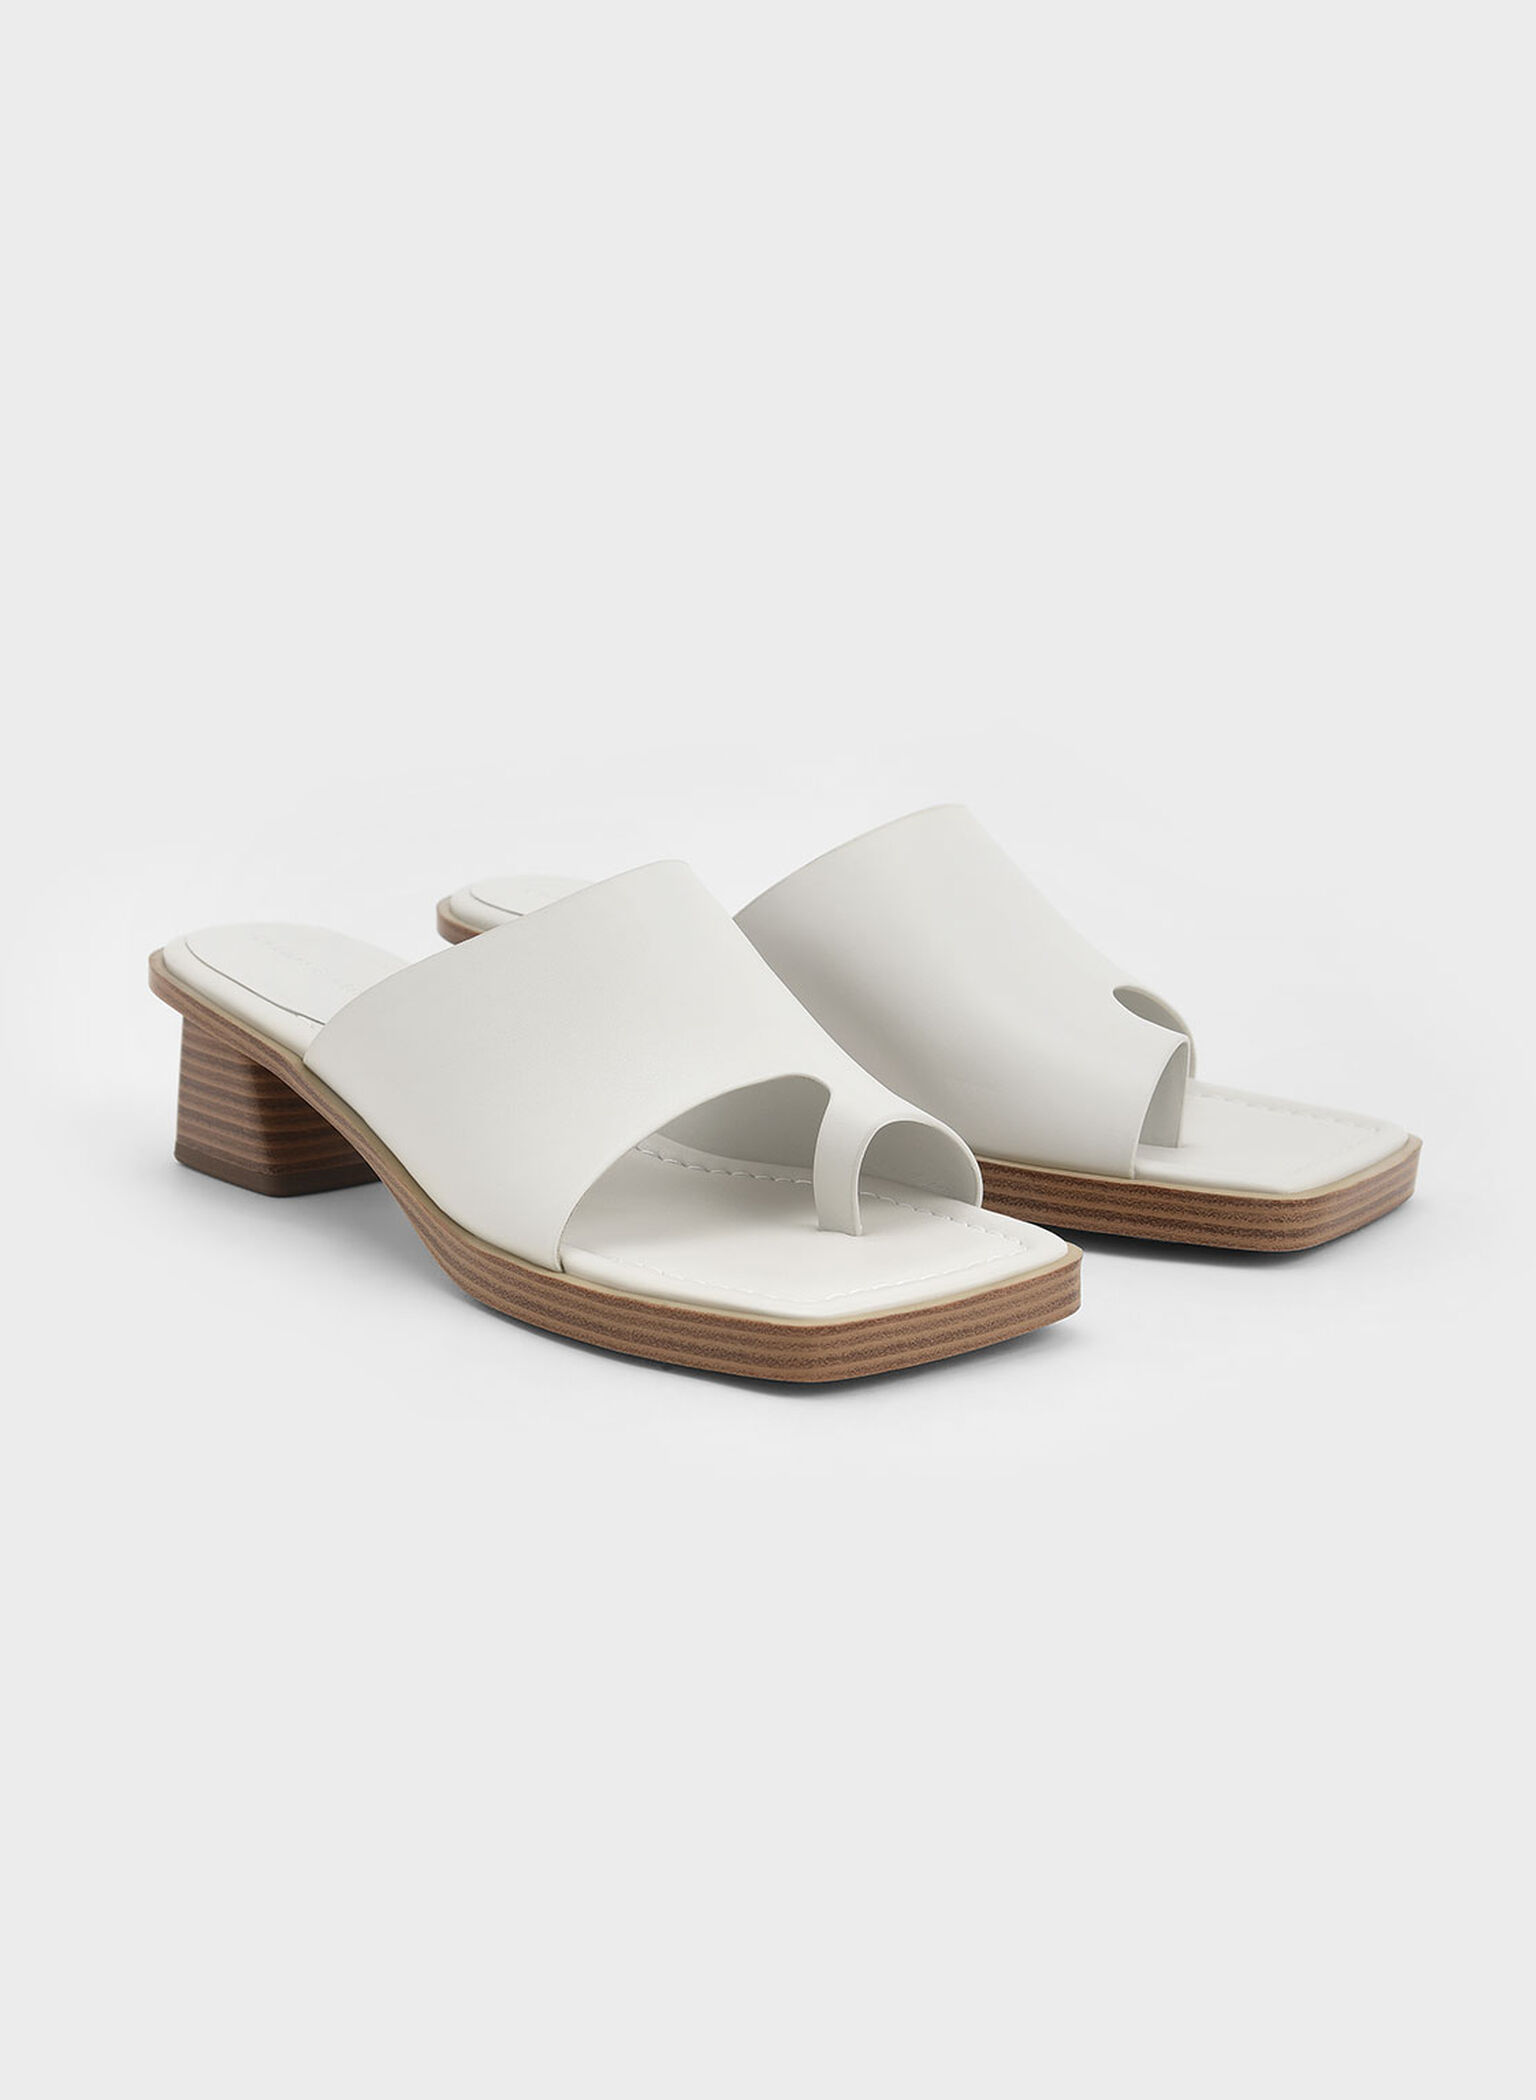 Chalk Toe Ring Stacked Heel Sandals - CHARLES & KEITH US